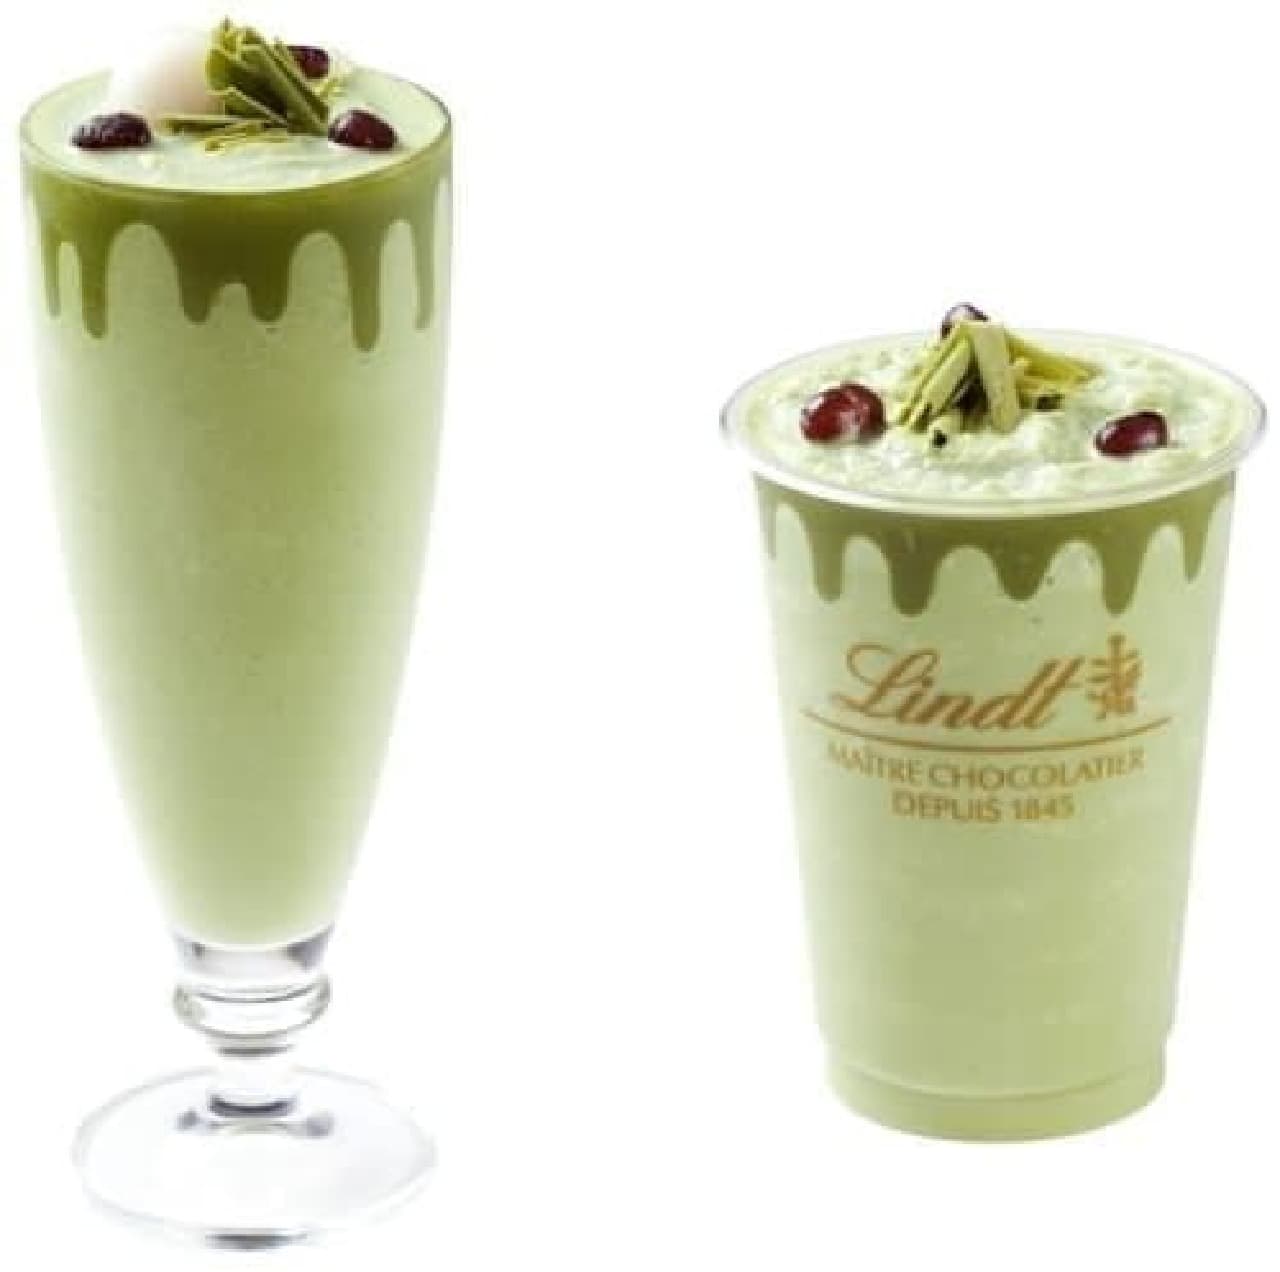 Matcha iced drink, which was very popular last year, can be drunk again this year!